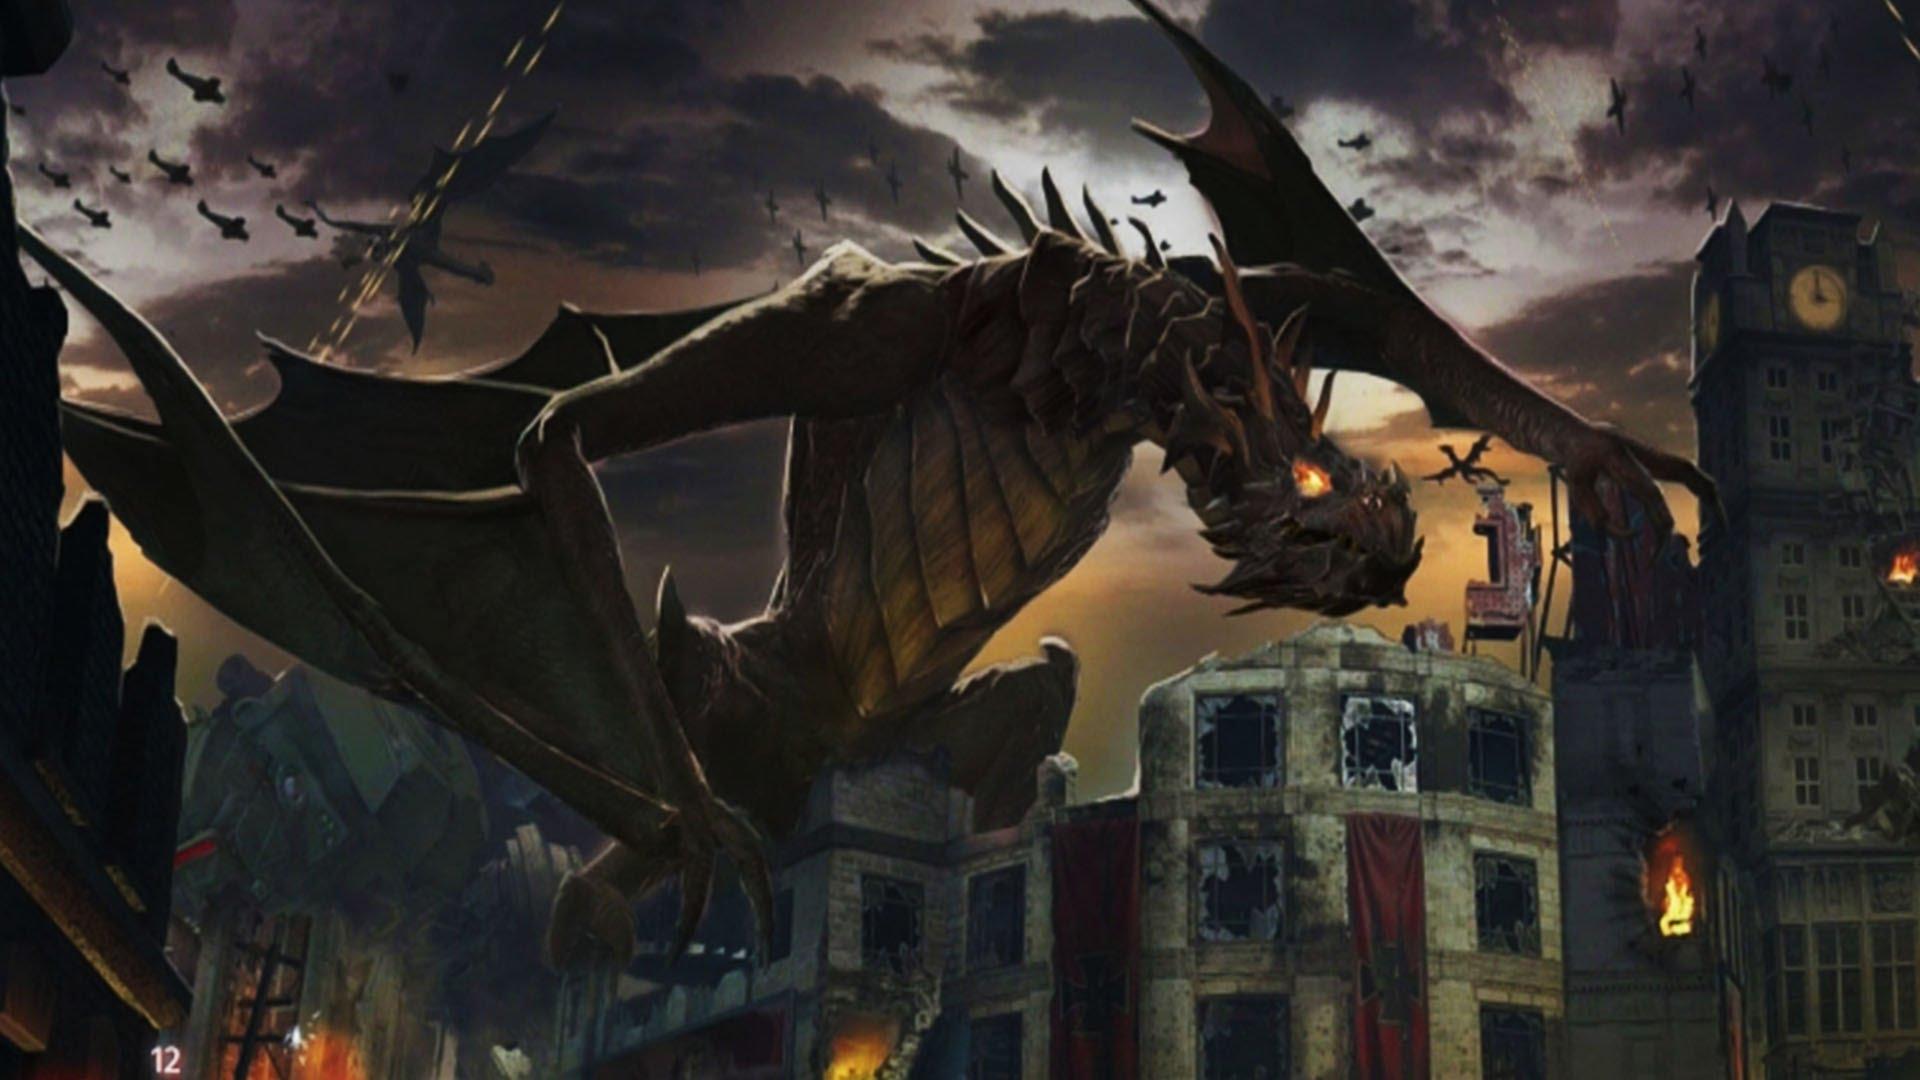 The Latest Black Ops 3 Zombies DLC Map Features Dragons and Blood